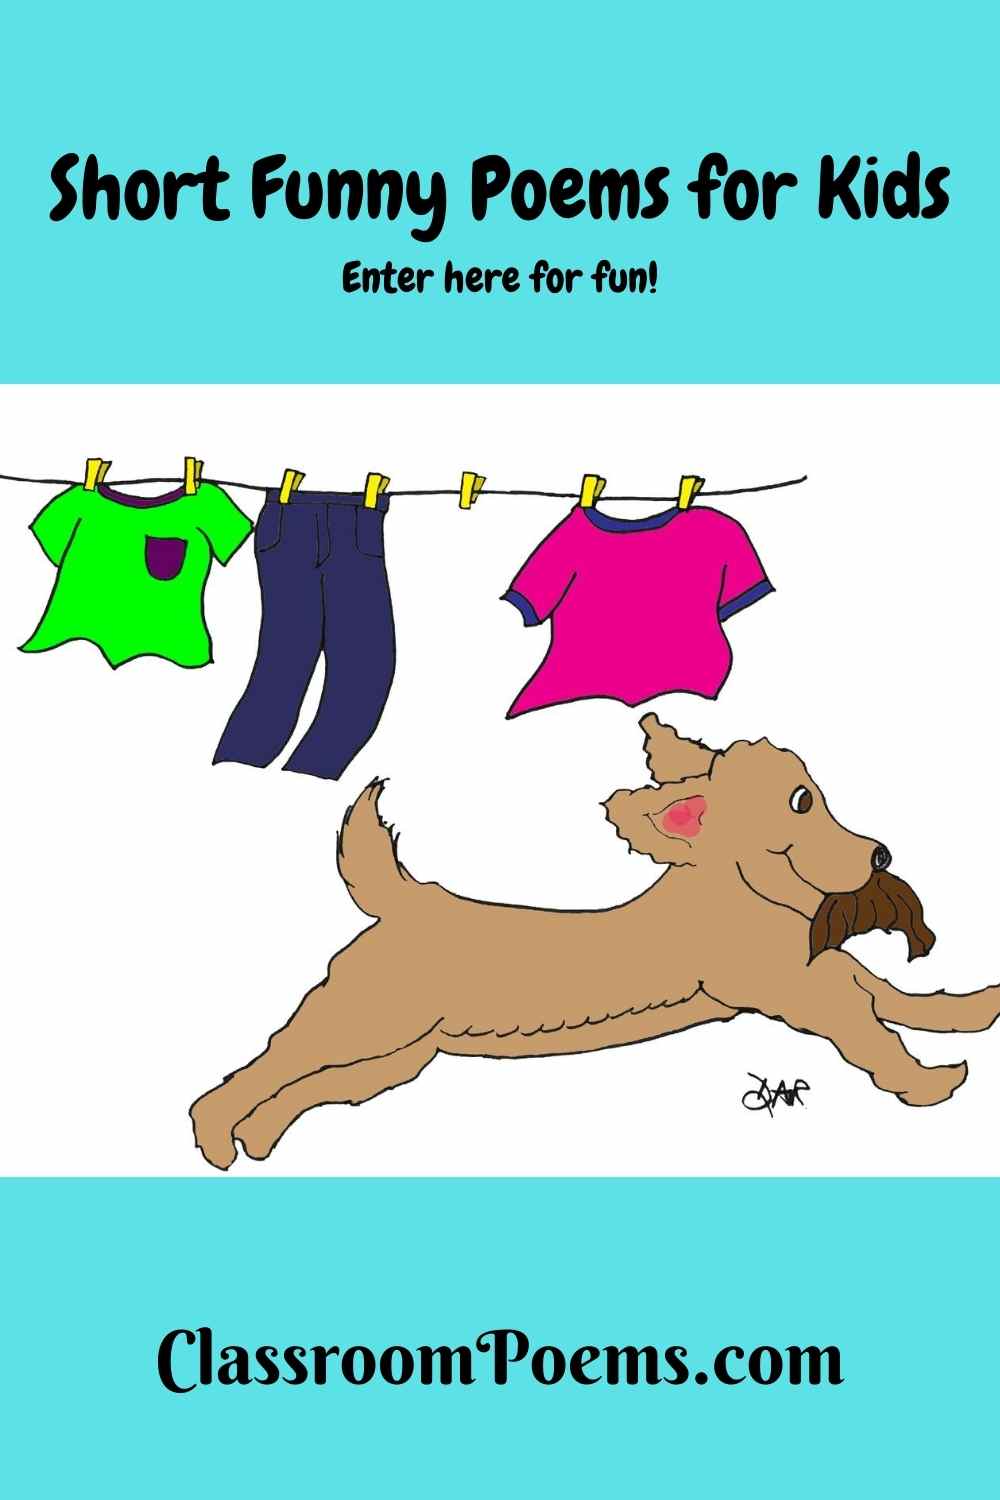 Short funny poems for kids by Denise Rodgers on ClassroomPoems.com. Dog stealing wig.